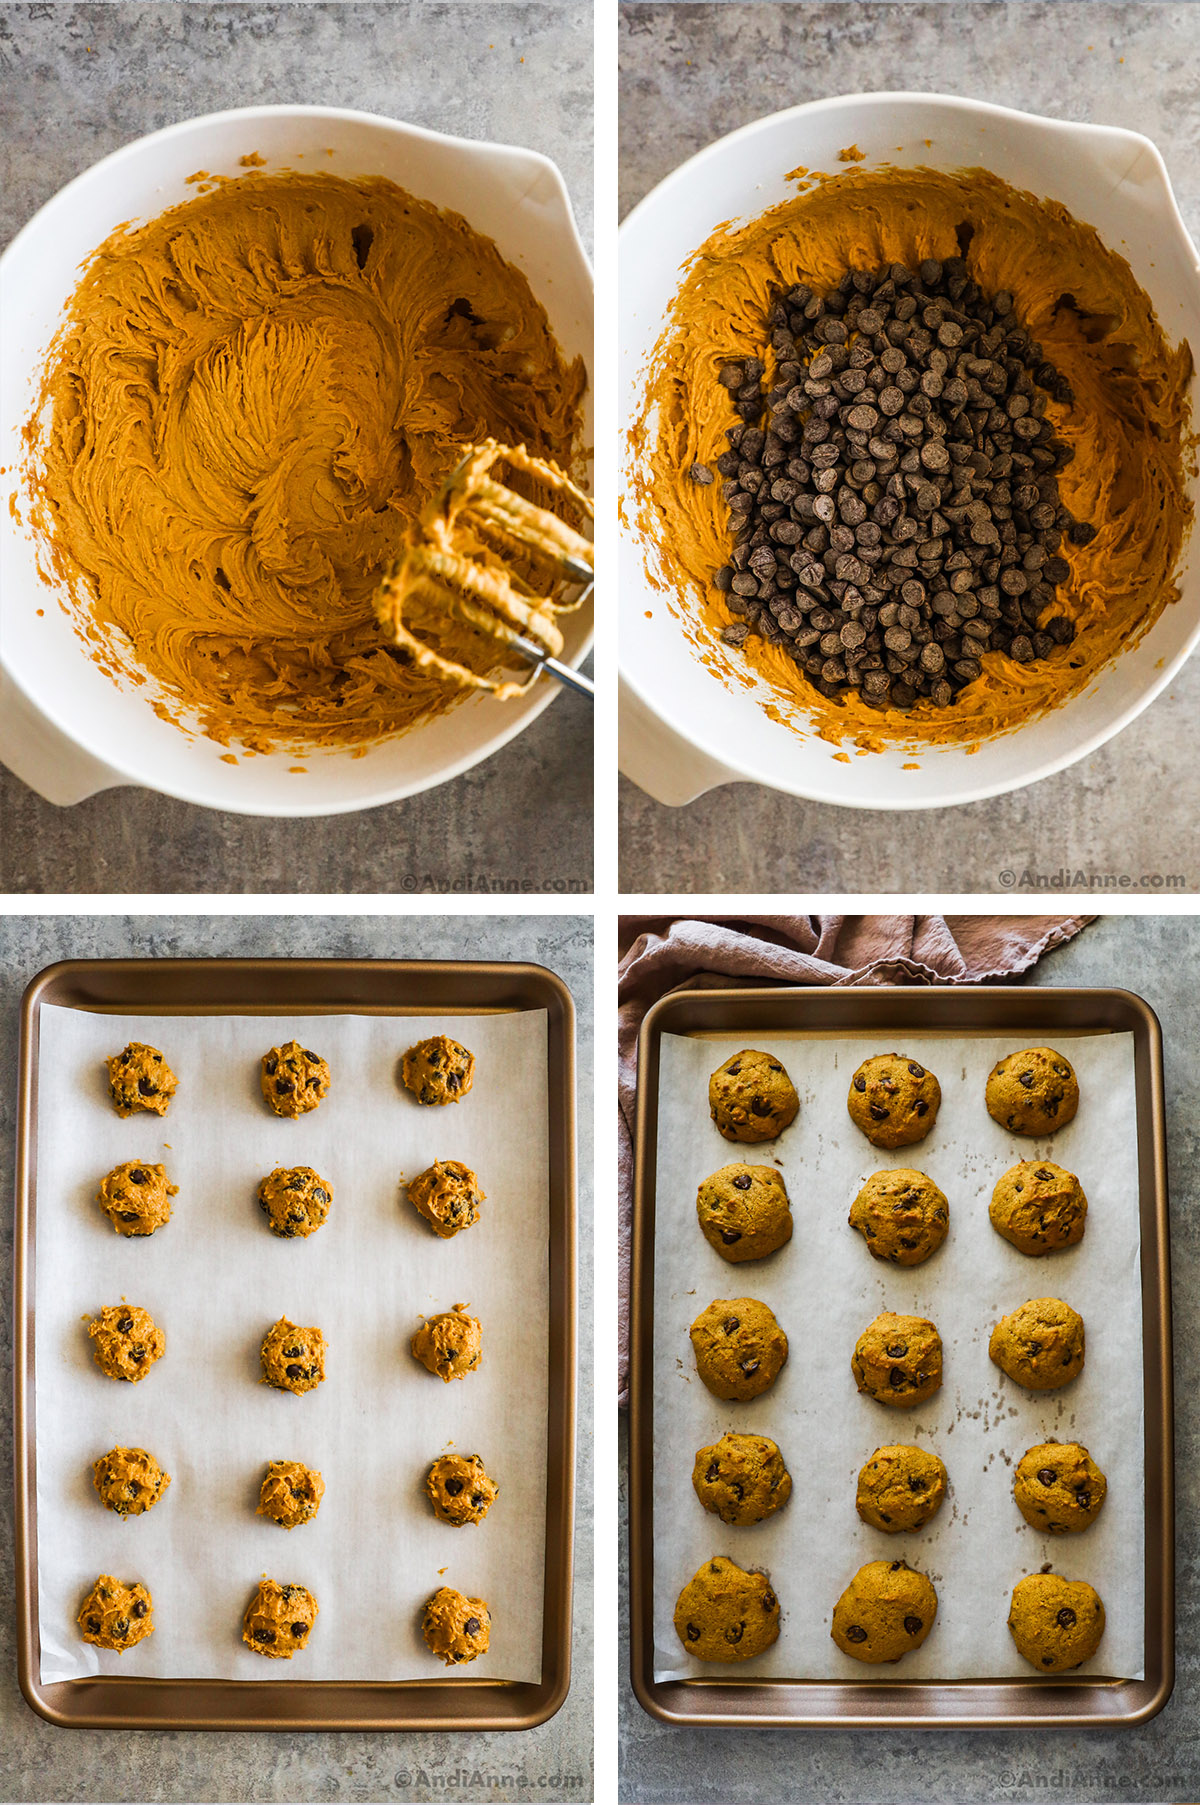 Four images on a counter including mixed batter, chocolate chips dumped into batter, unbaked cookies on a baking sheet, and baked pumpkin chocolate cookies on a baking sheet.